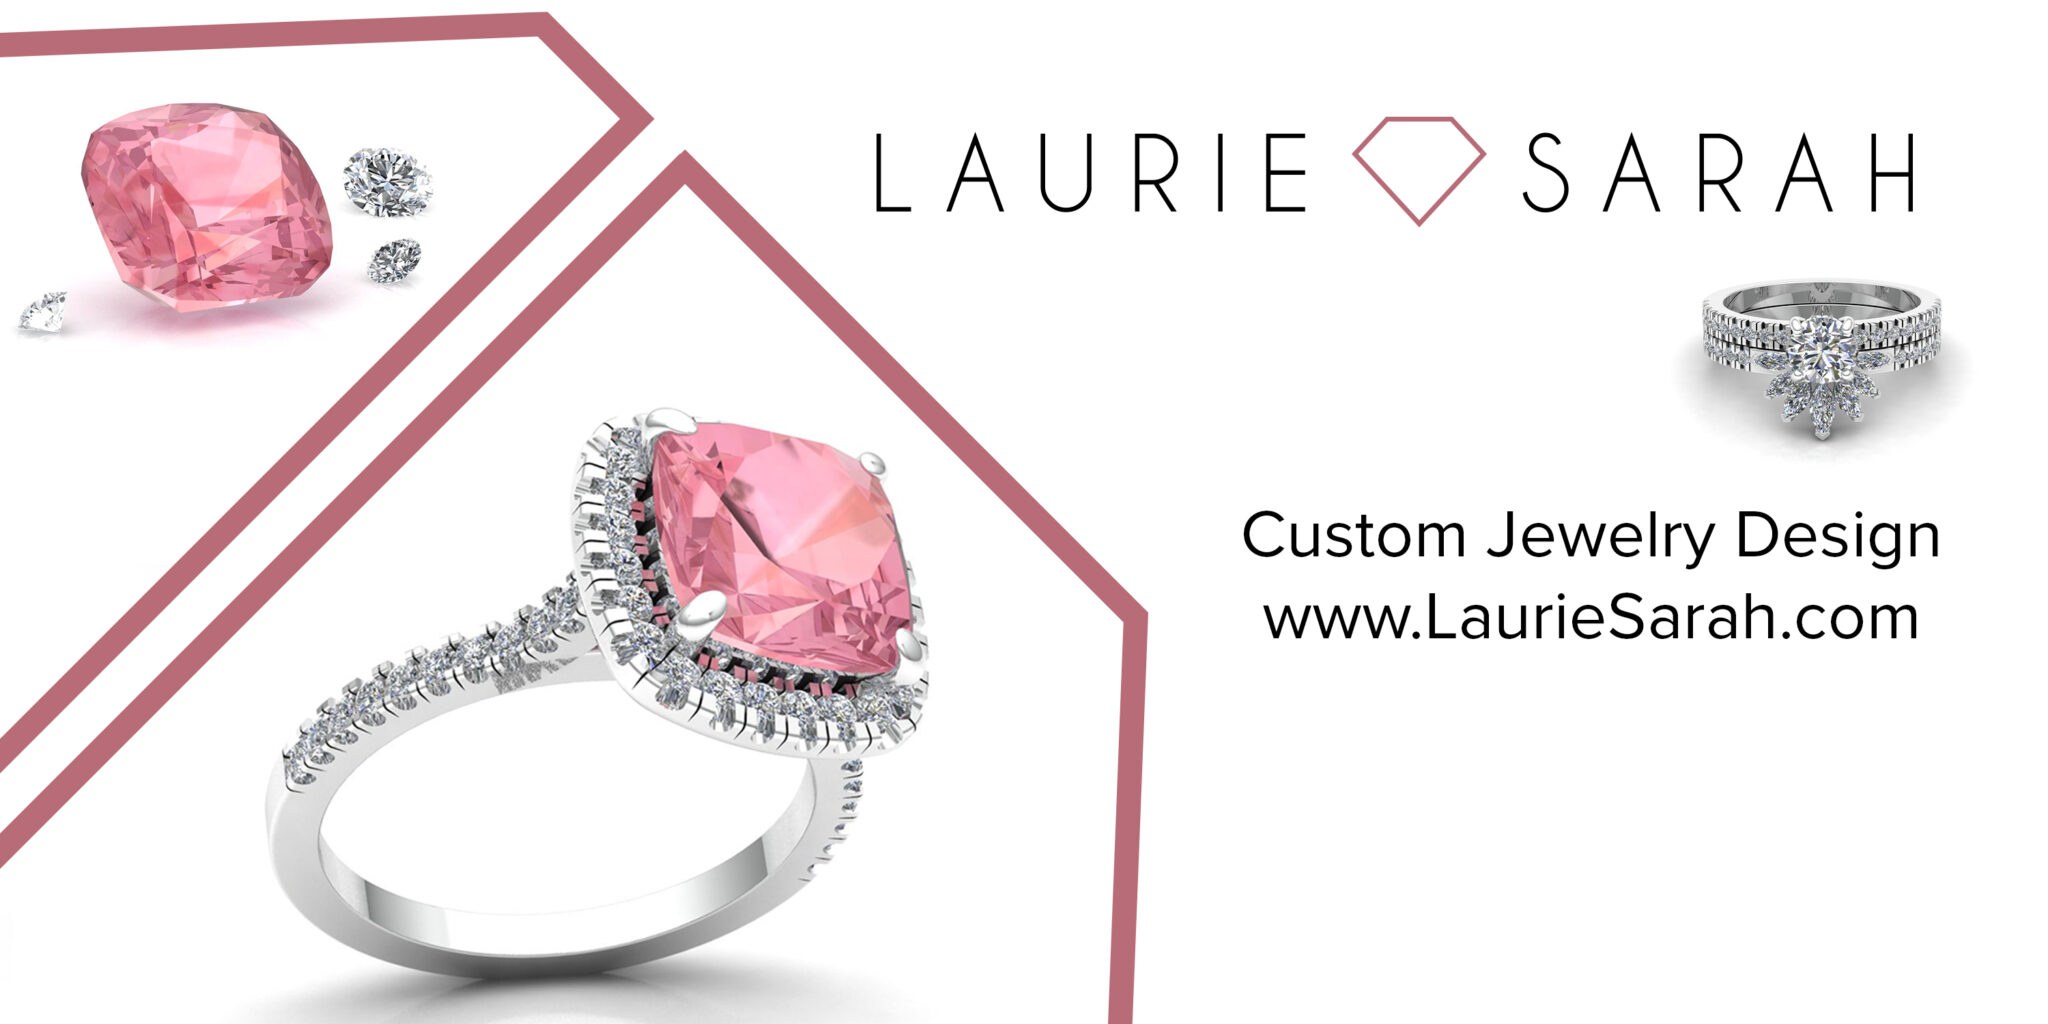 Custom Jewelry Design by Laurie Sarah